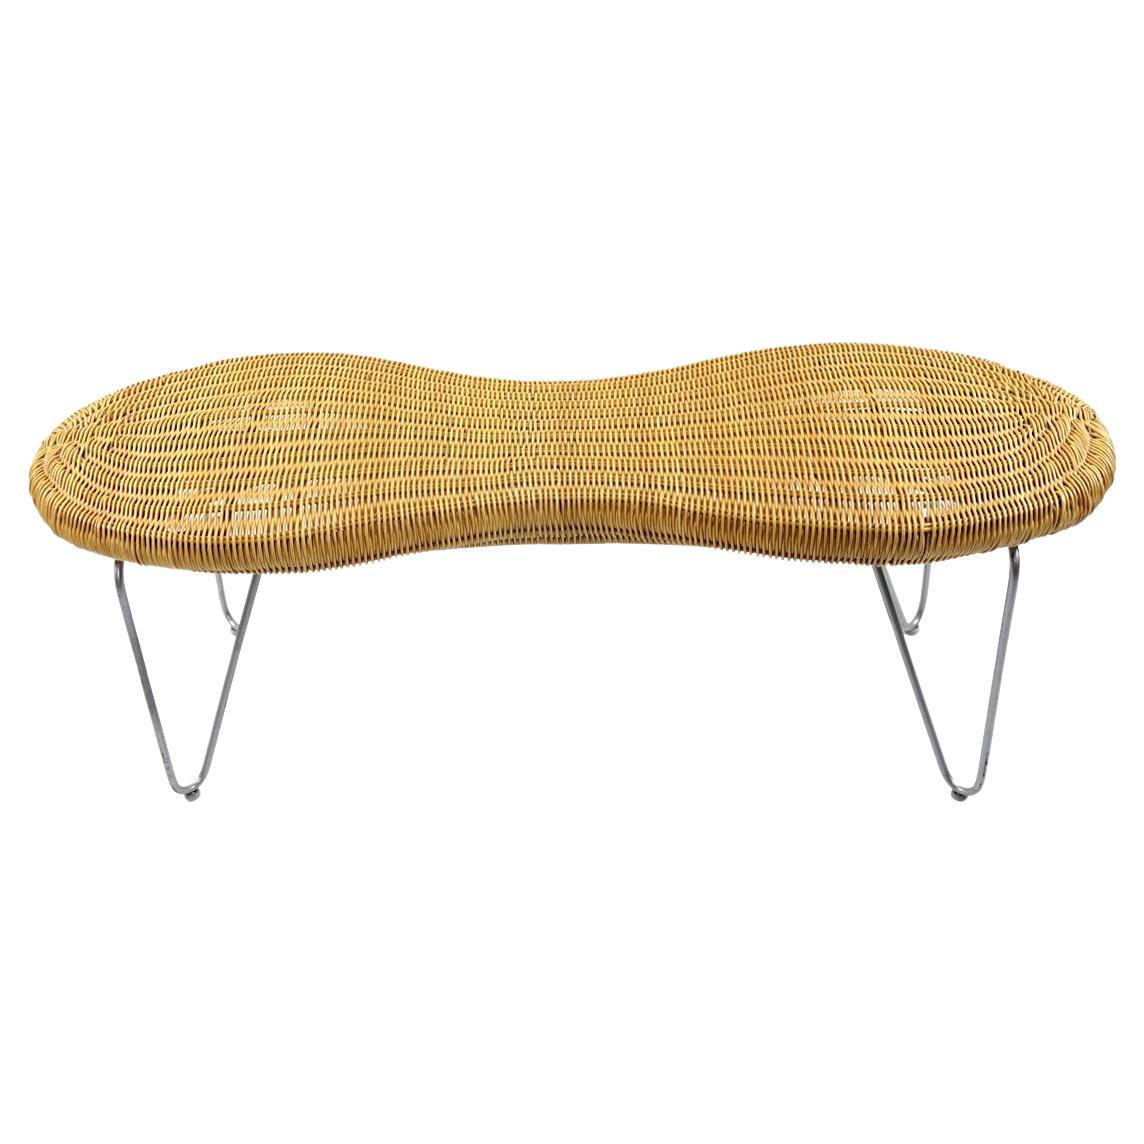 Bench in the Shape of a Peeling Peanut Made of Rattan, Wood and Stainless Steel